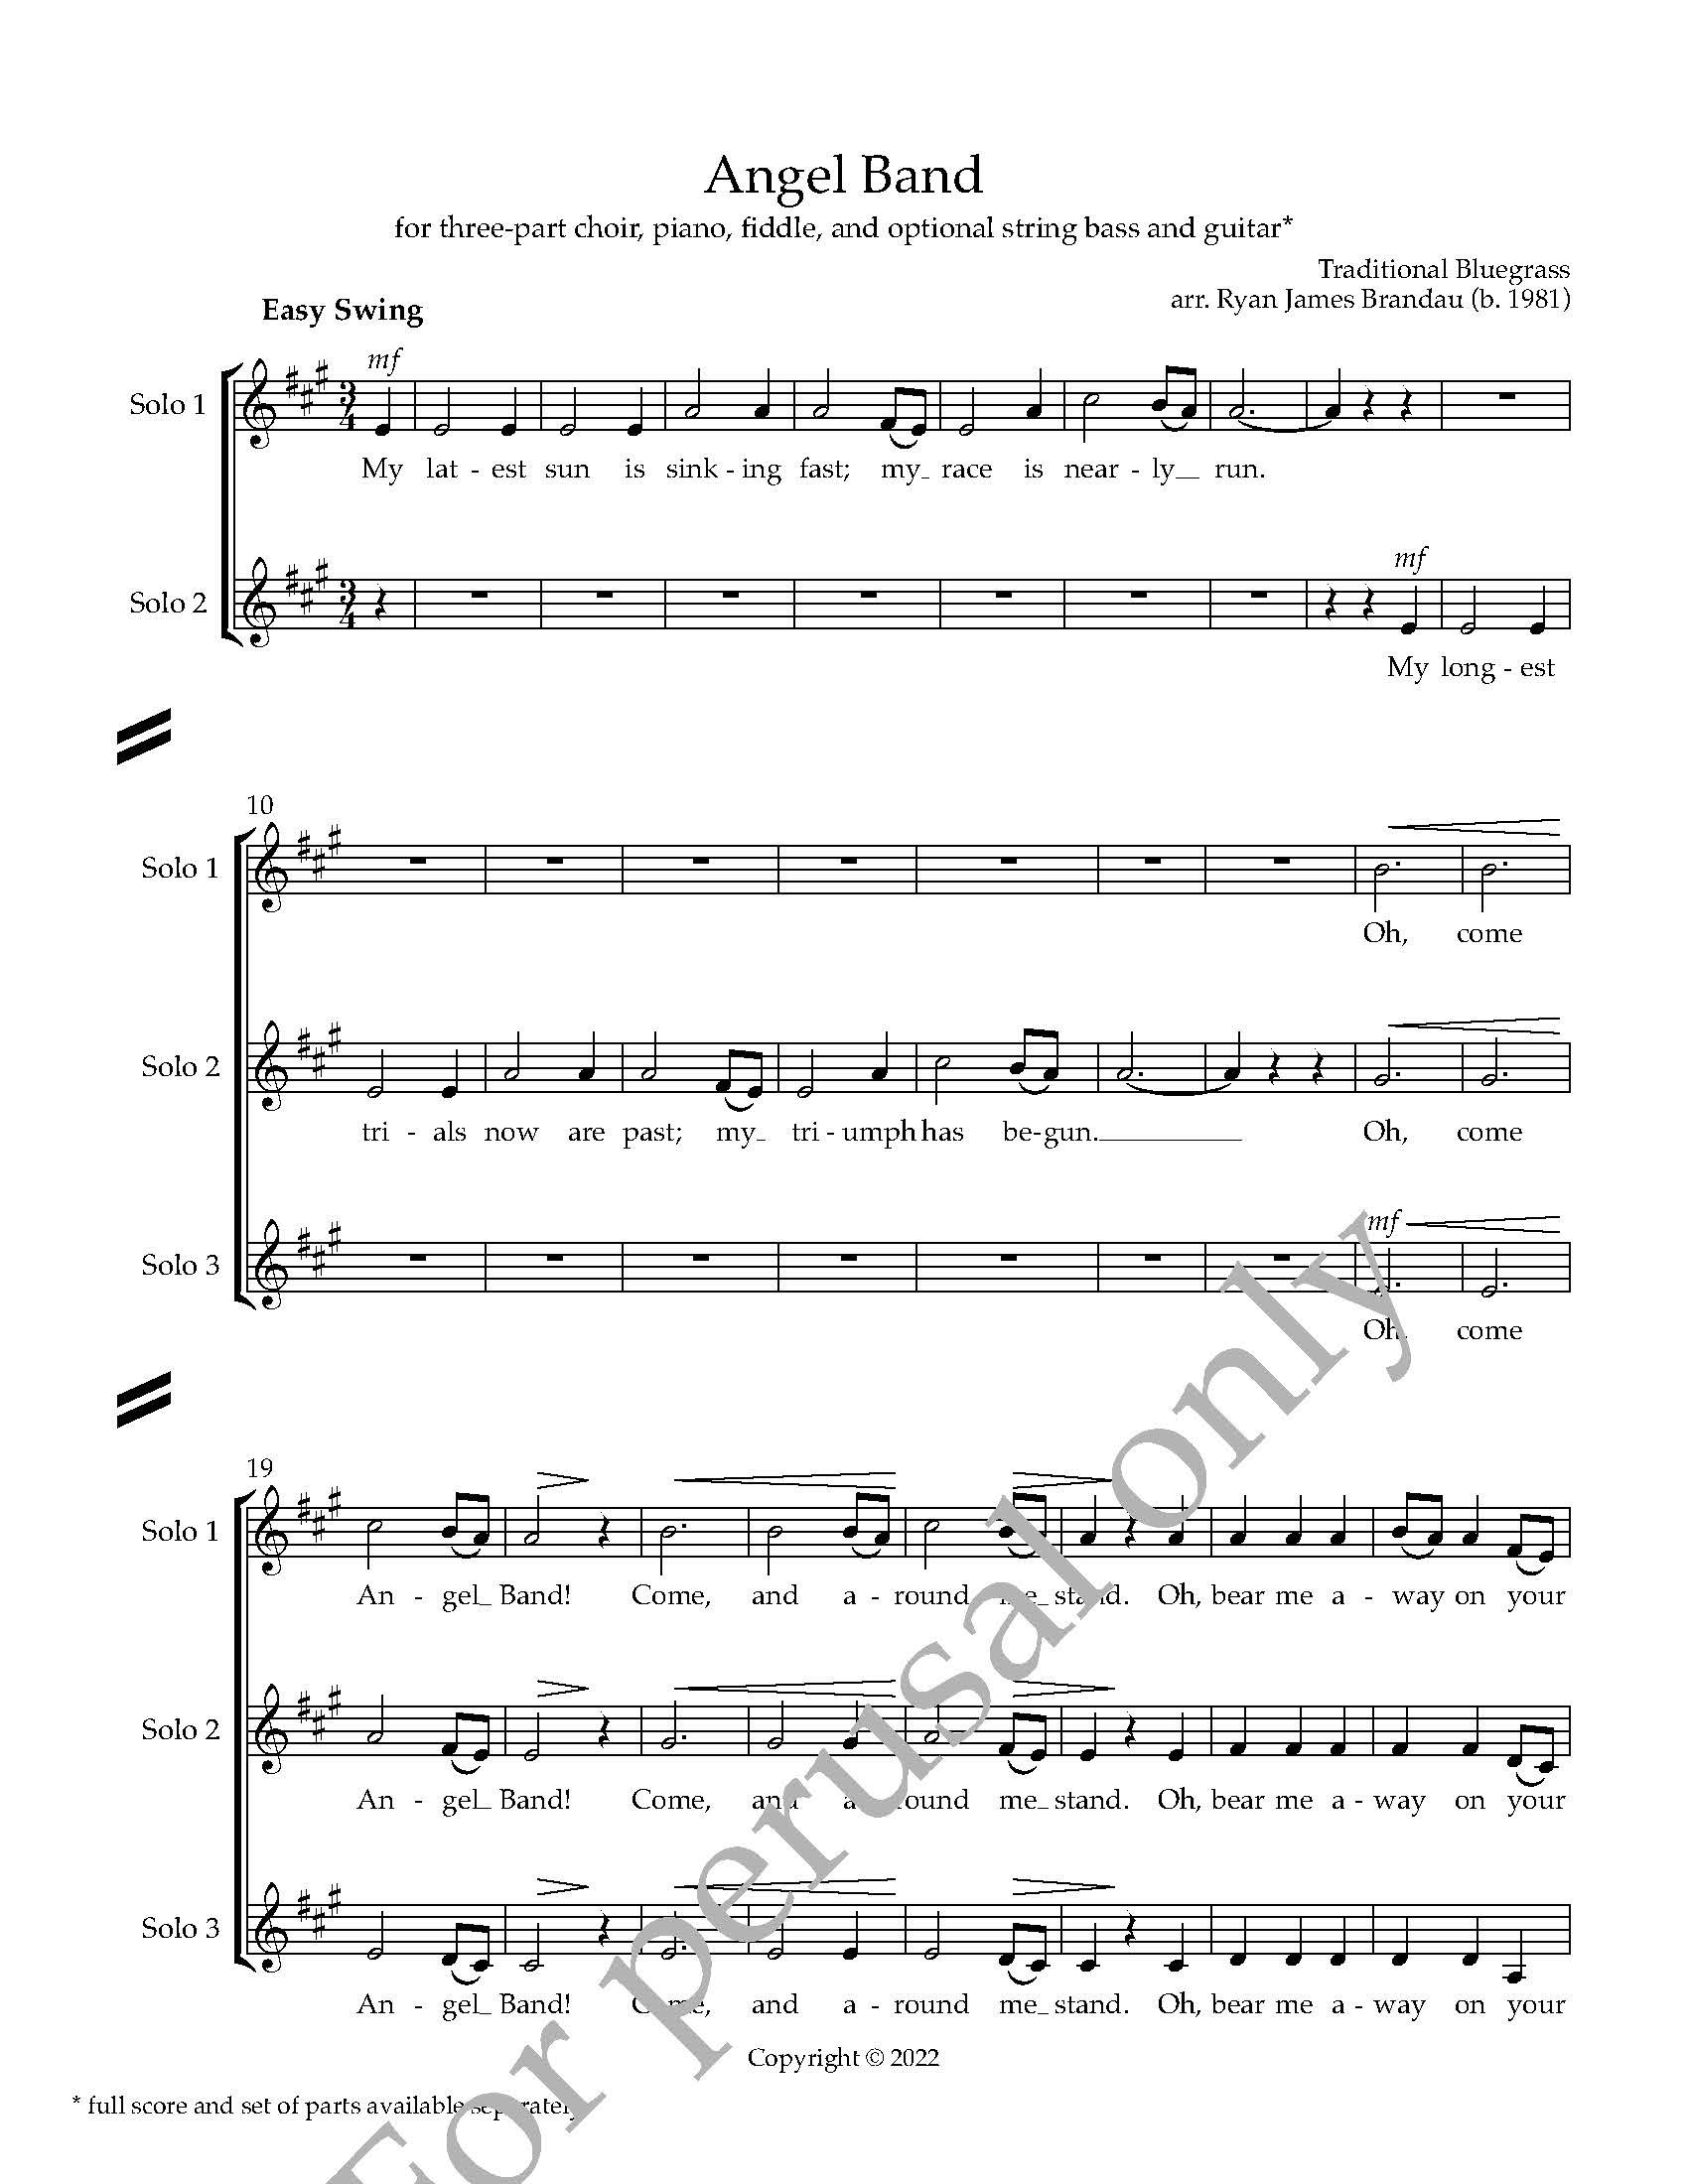 VOCAL SCORE  preview- Angel Band for three-part choir, piano, fiddle, guitar, string bass - arr. Ryan James Brandau_Page_03.jpg